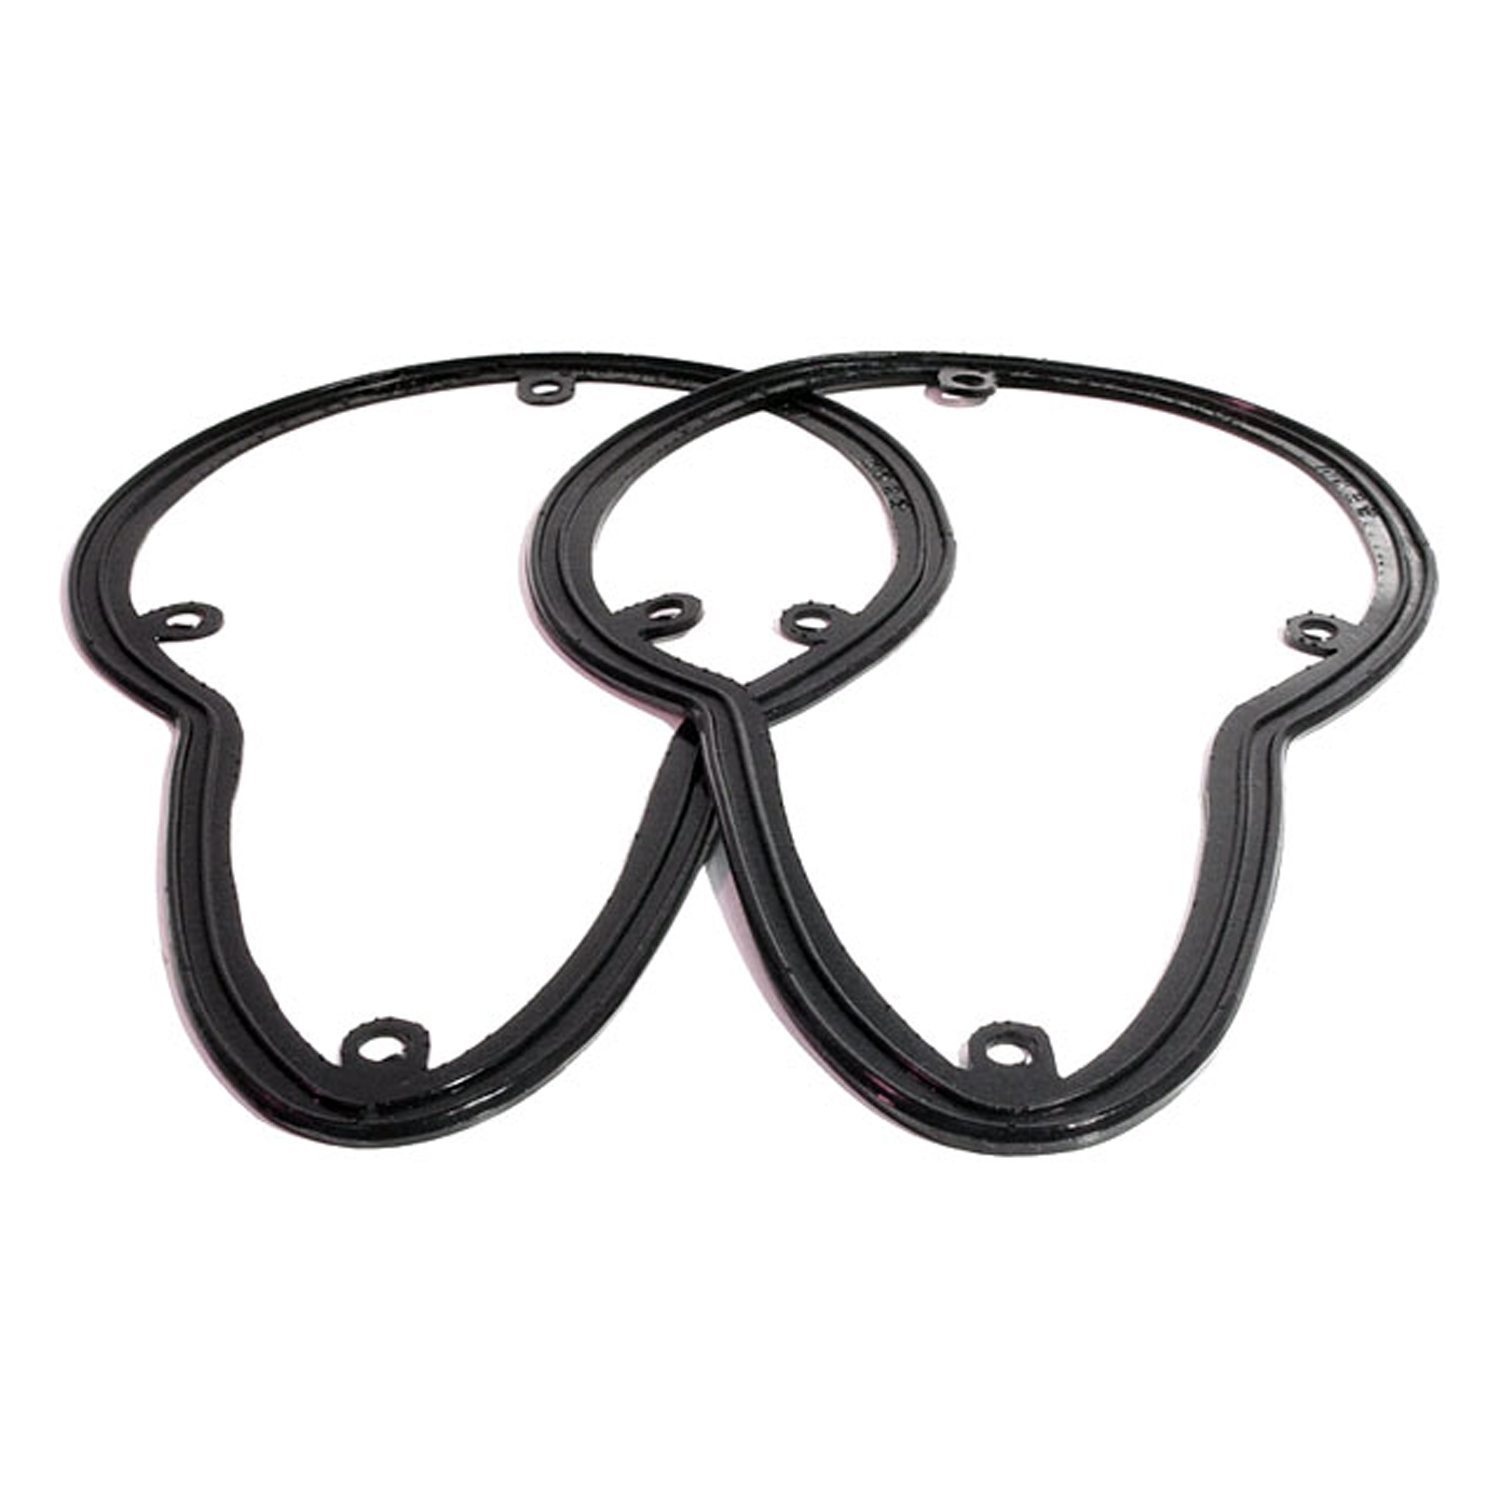 1955 Mercury Monterey Tail-light  Gaskets for Station Wagon.  8 wide X 12 long-MP 1009-G